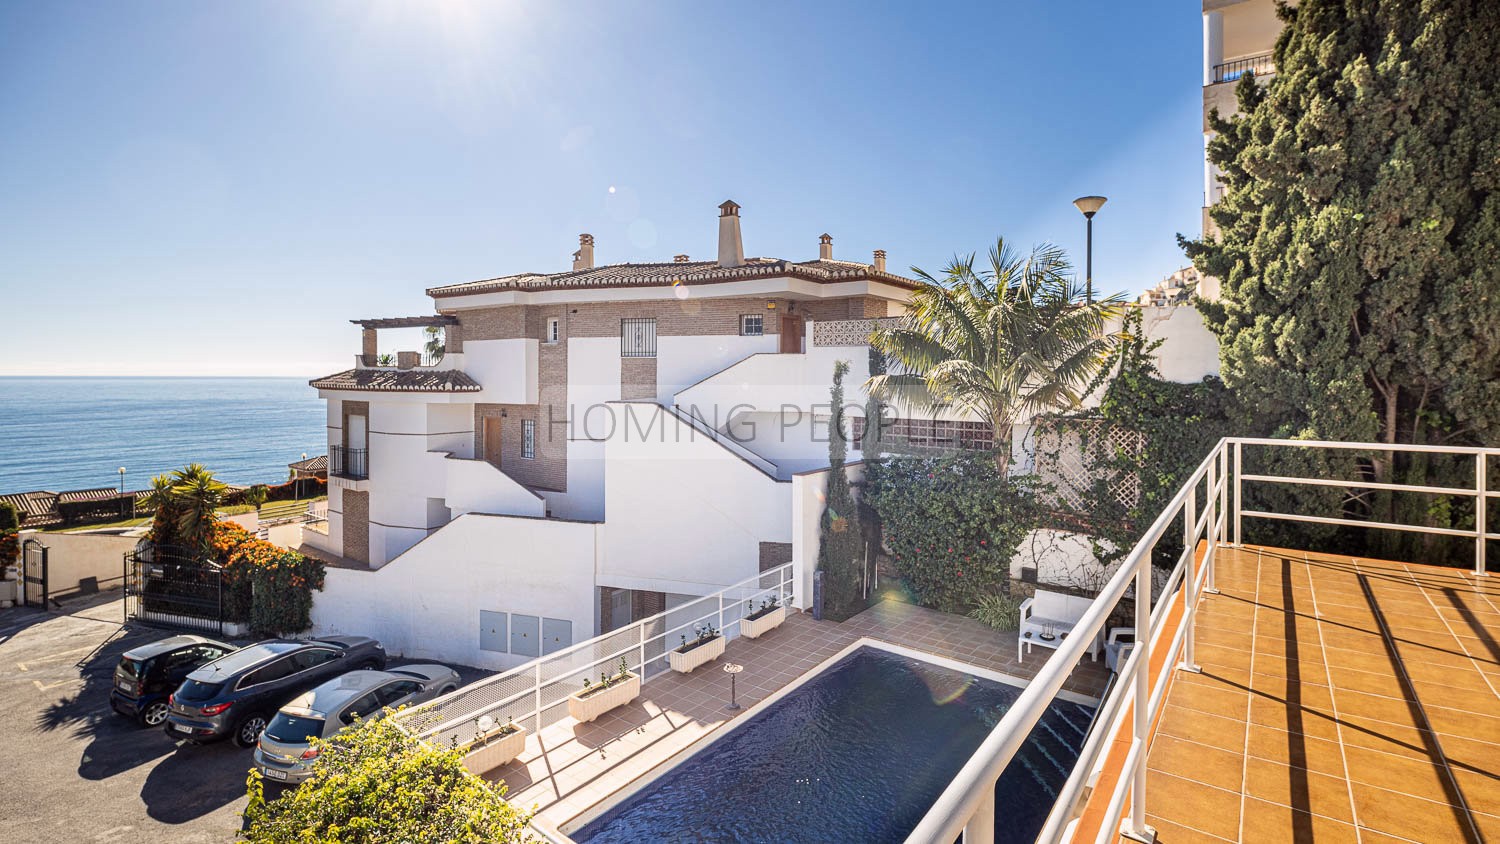 [SOLD] Semi-detached villa with pool, garden and views over the Mediterranean Sea